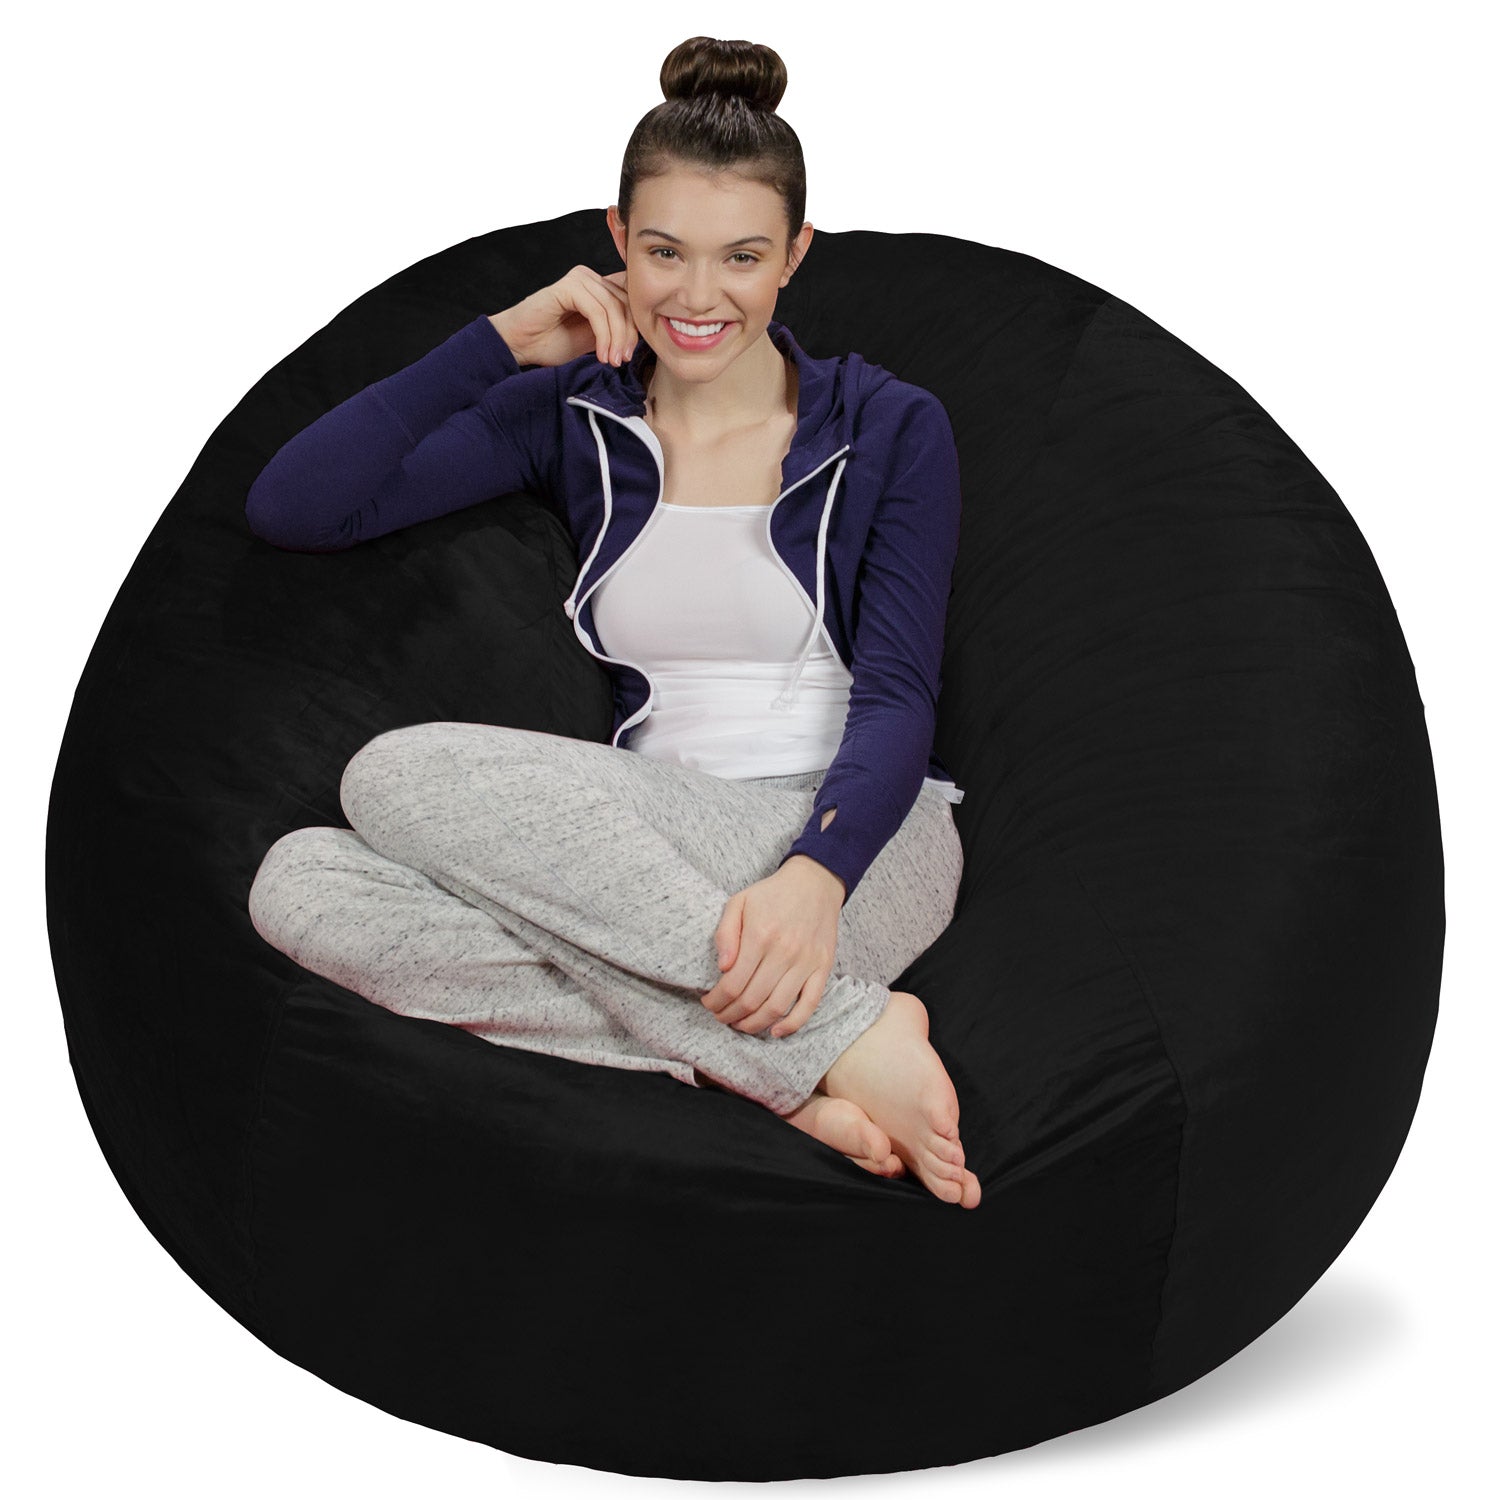 Sofa Sack Bean Bag Chair, Memory Foam Lounger with Microsuede Cover, Kids,  Adults, 5 ft, Purple 